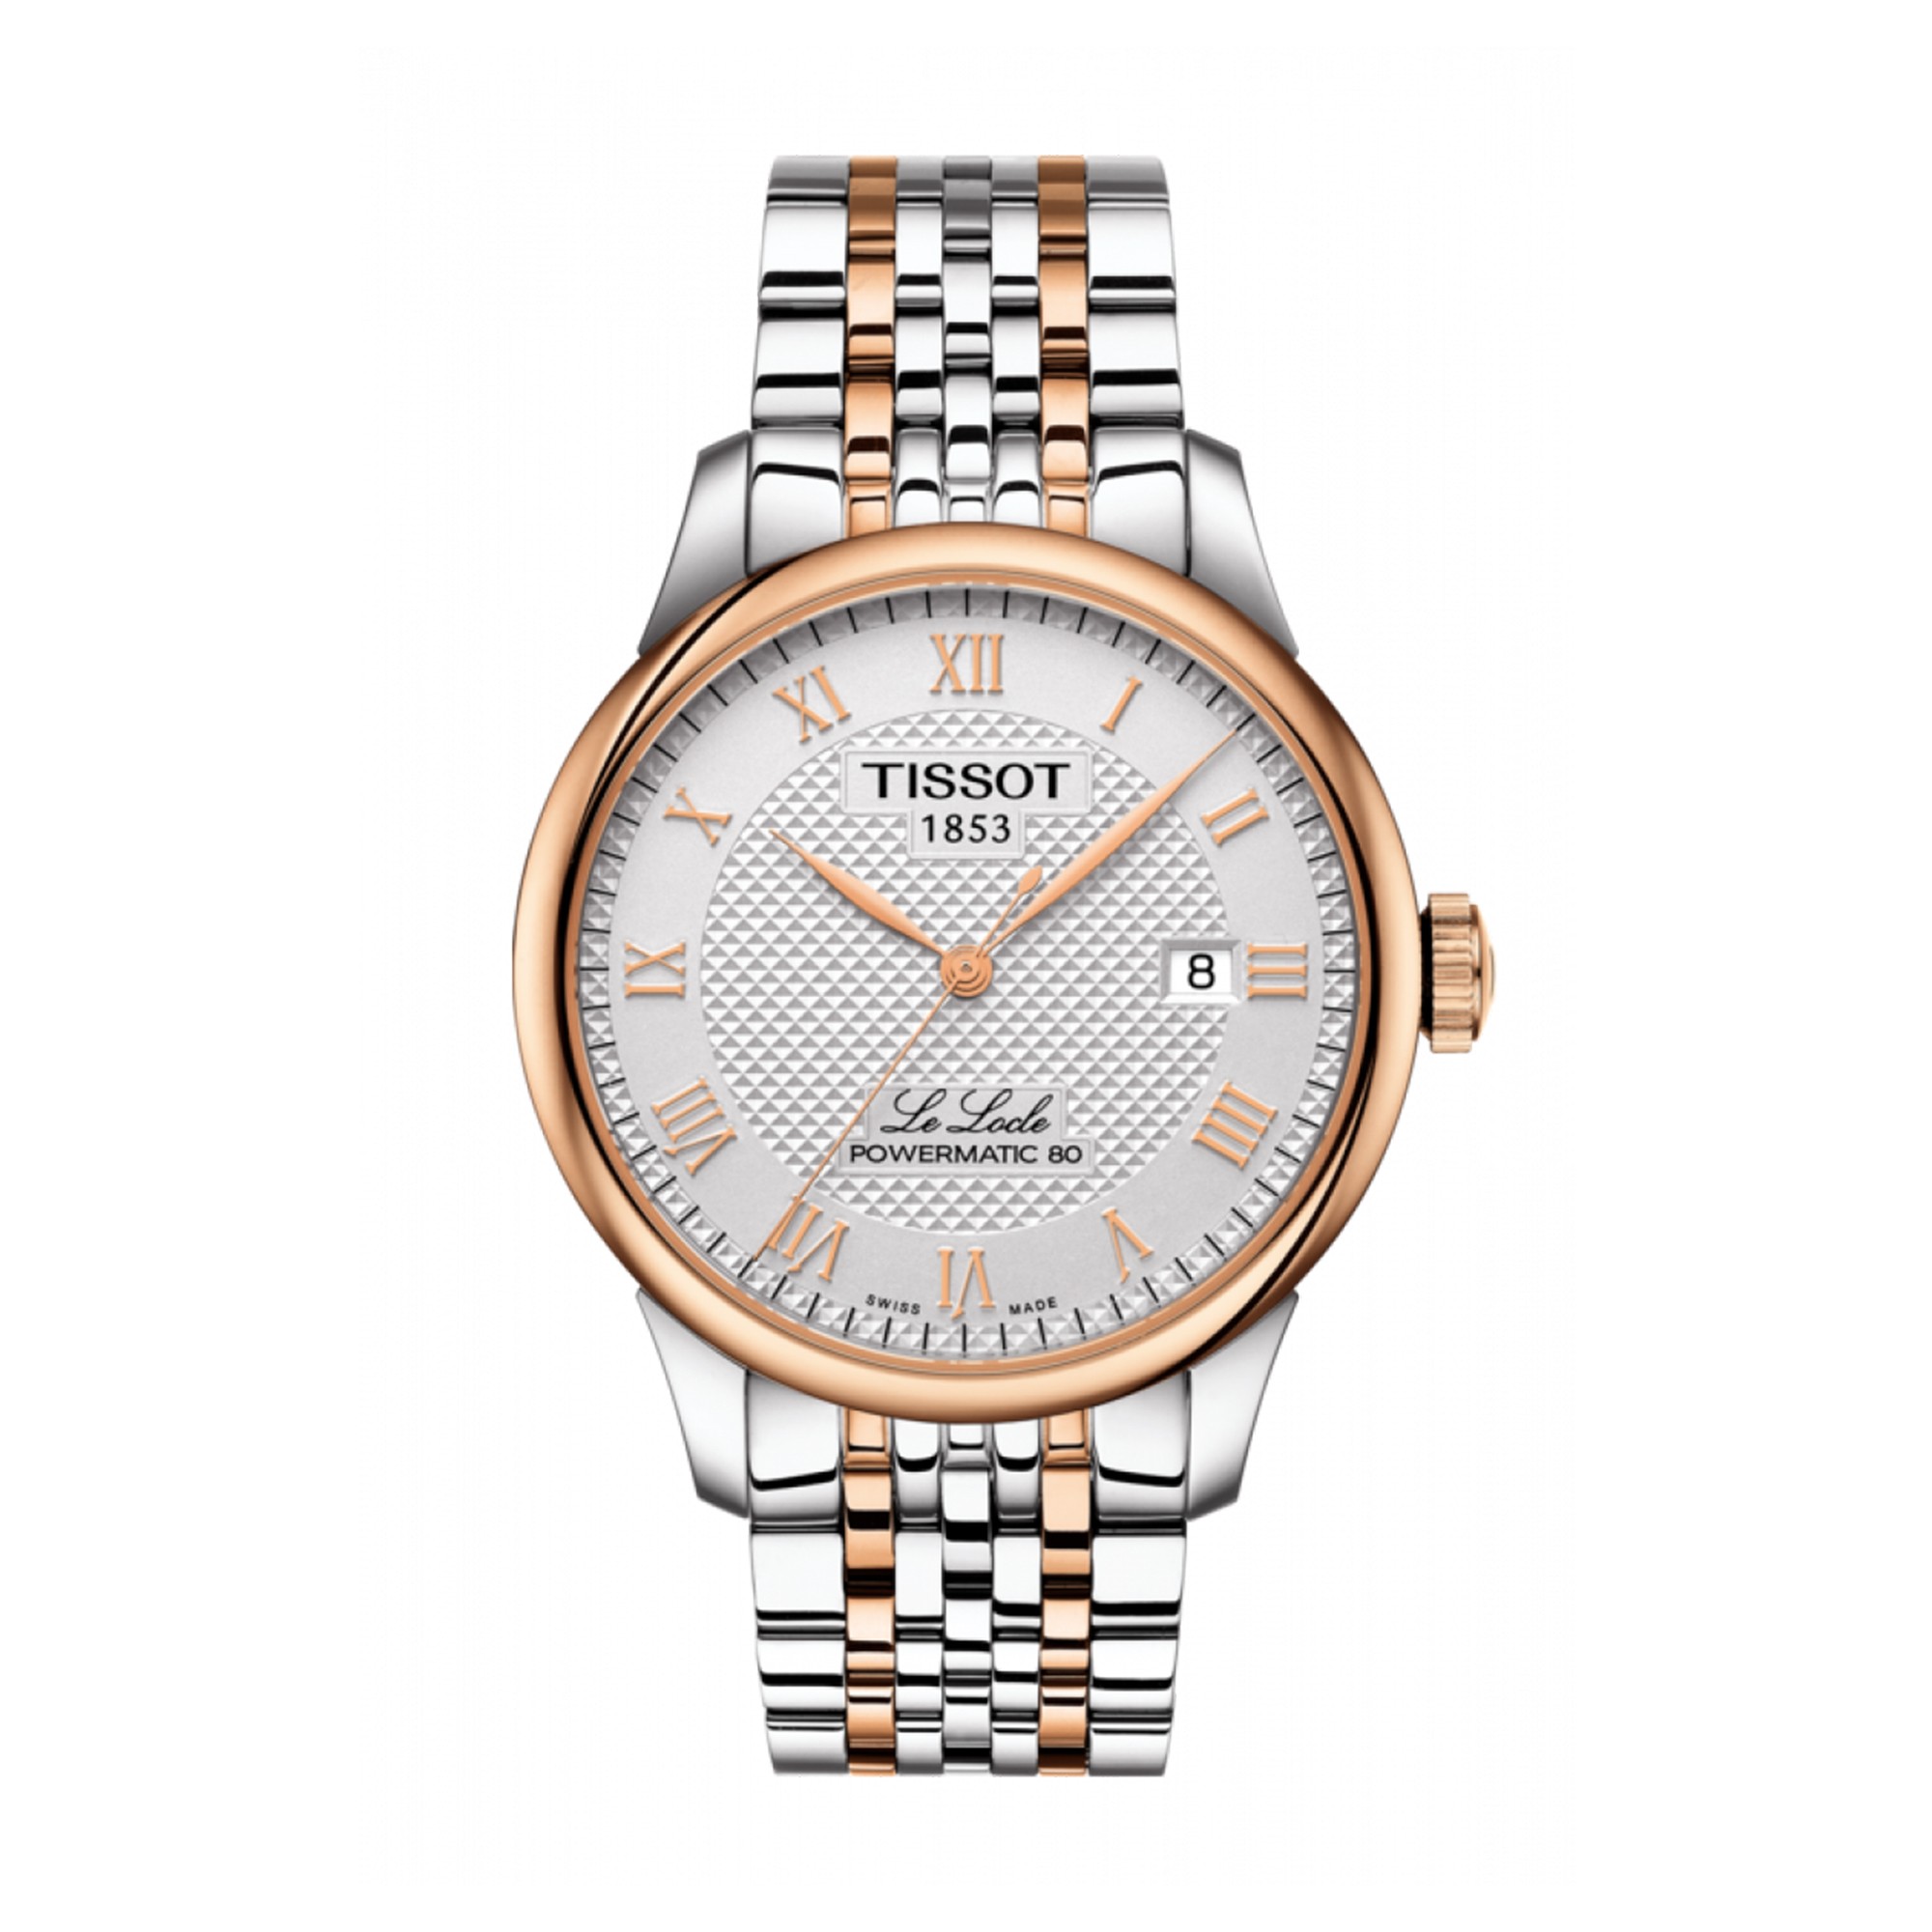 Tissot T006.407.22.033.00 Le Locle Powermatic 80 Stainless Steel Watch in Metallic Womens Accessories Watches 